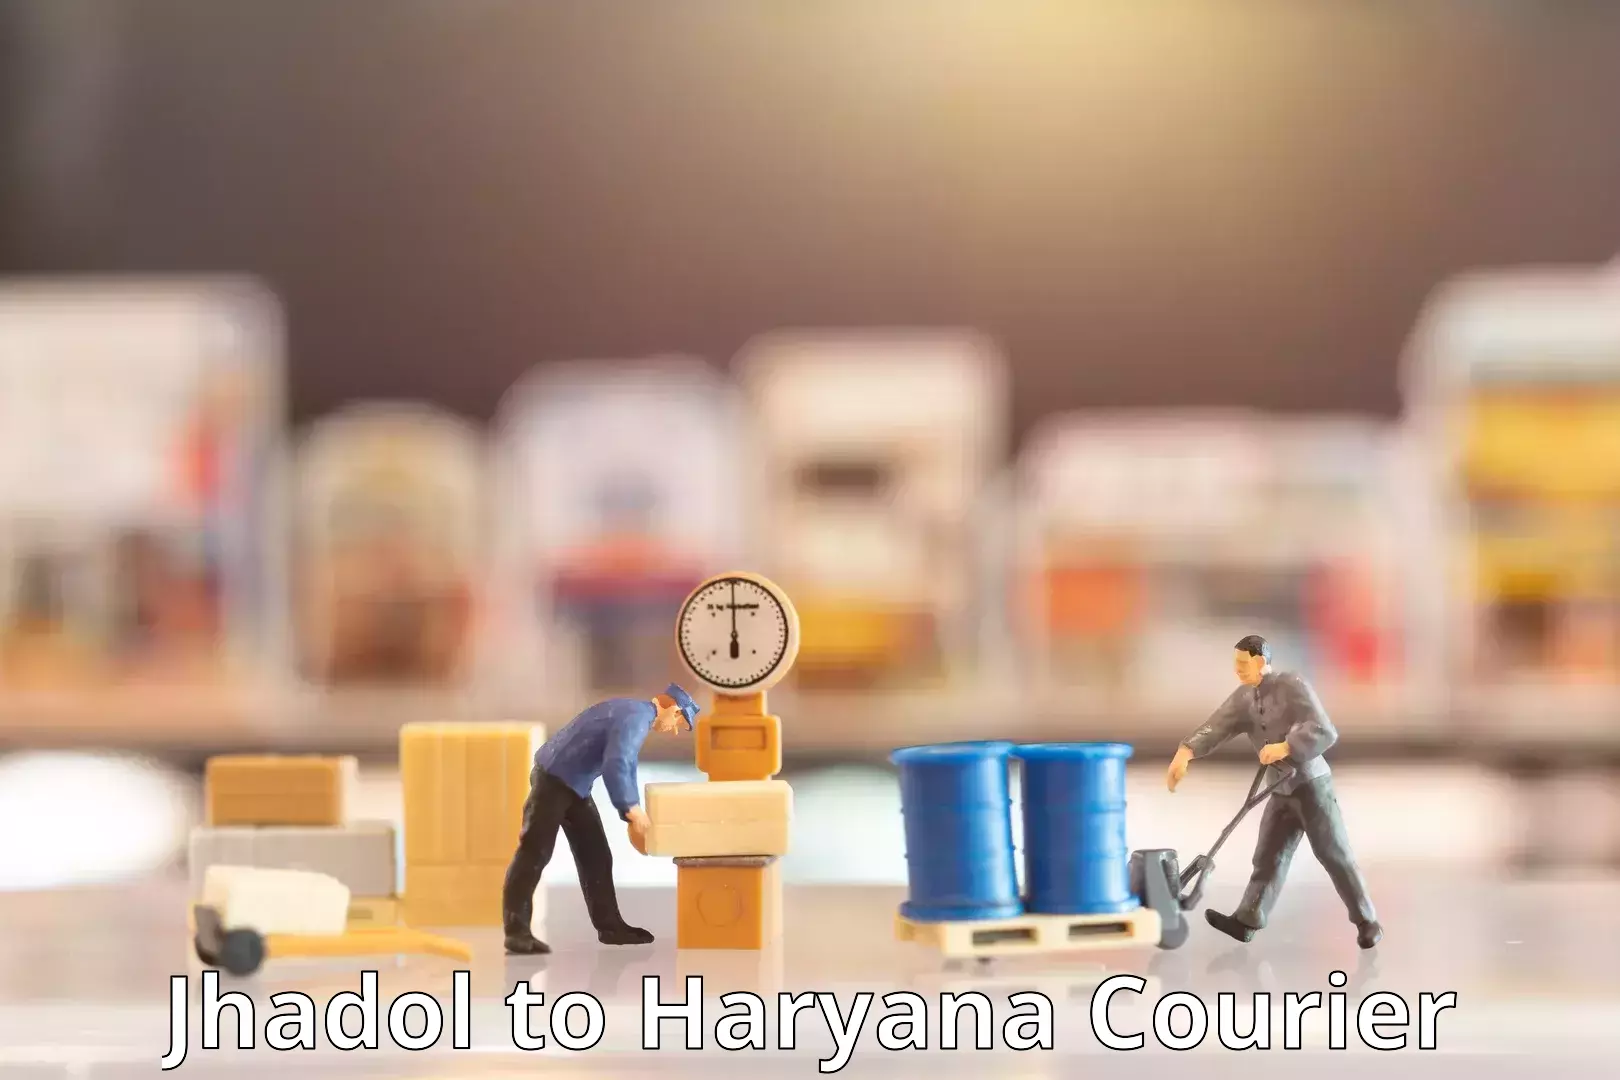 Trackable shipping service Jhadol to NCR Haryana